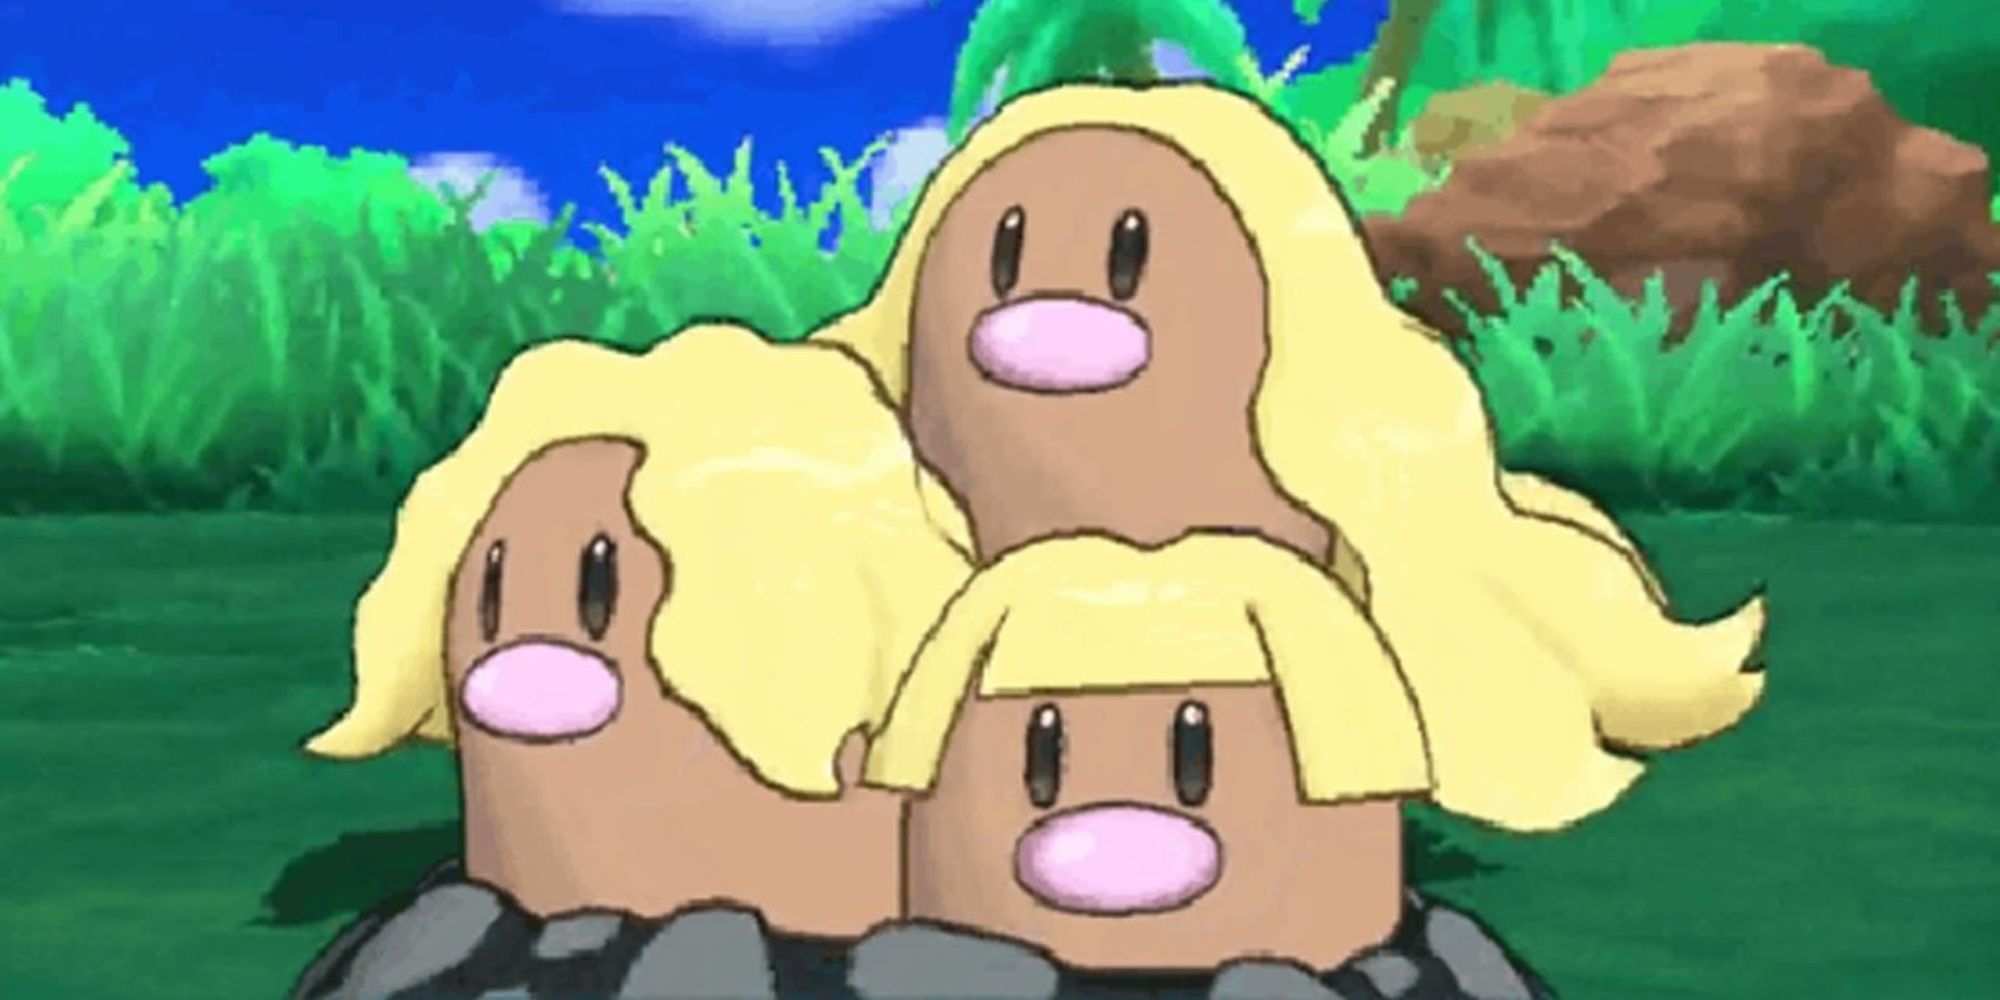 Alolan Dugtrio pops out of the ground in a grassy field